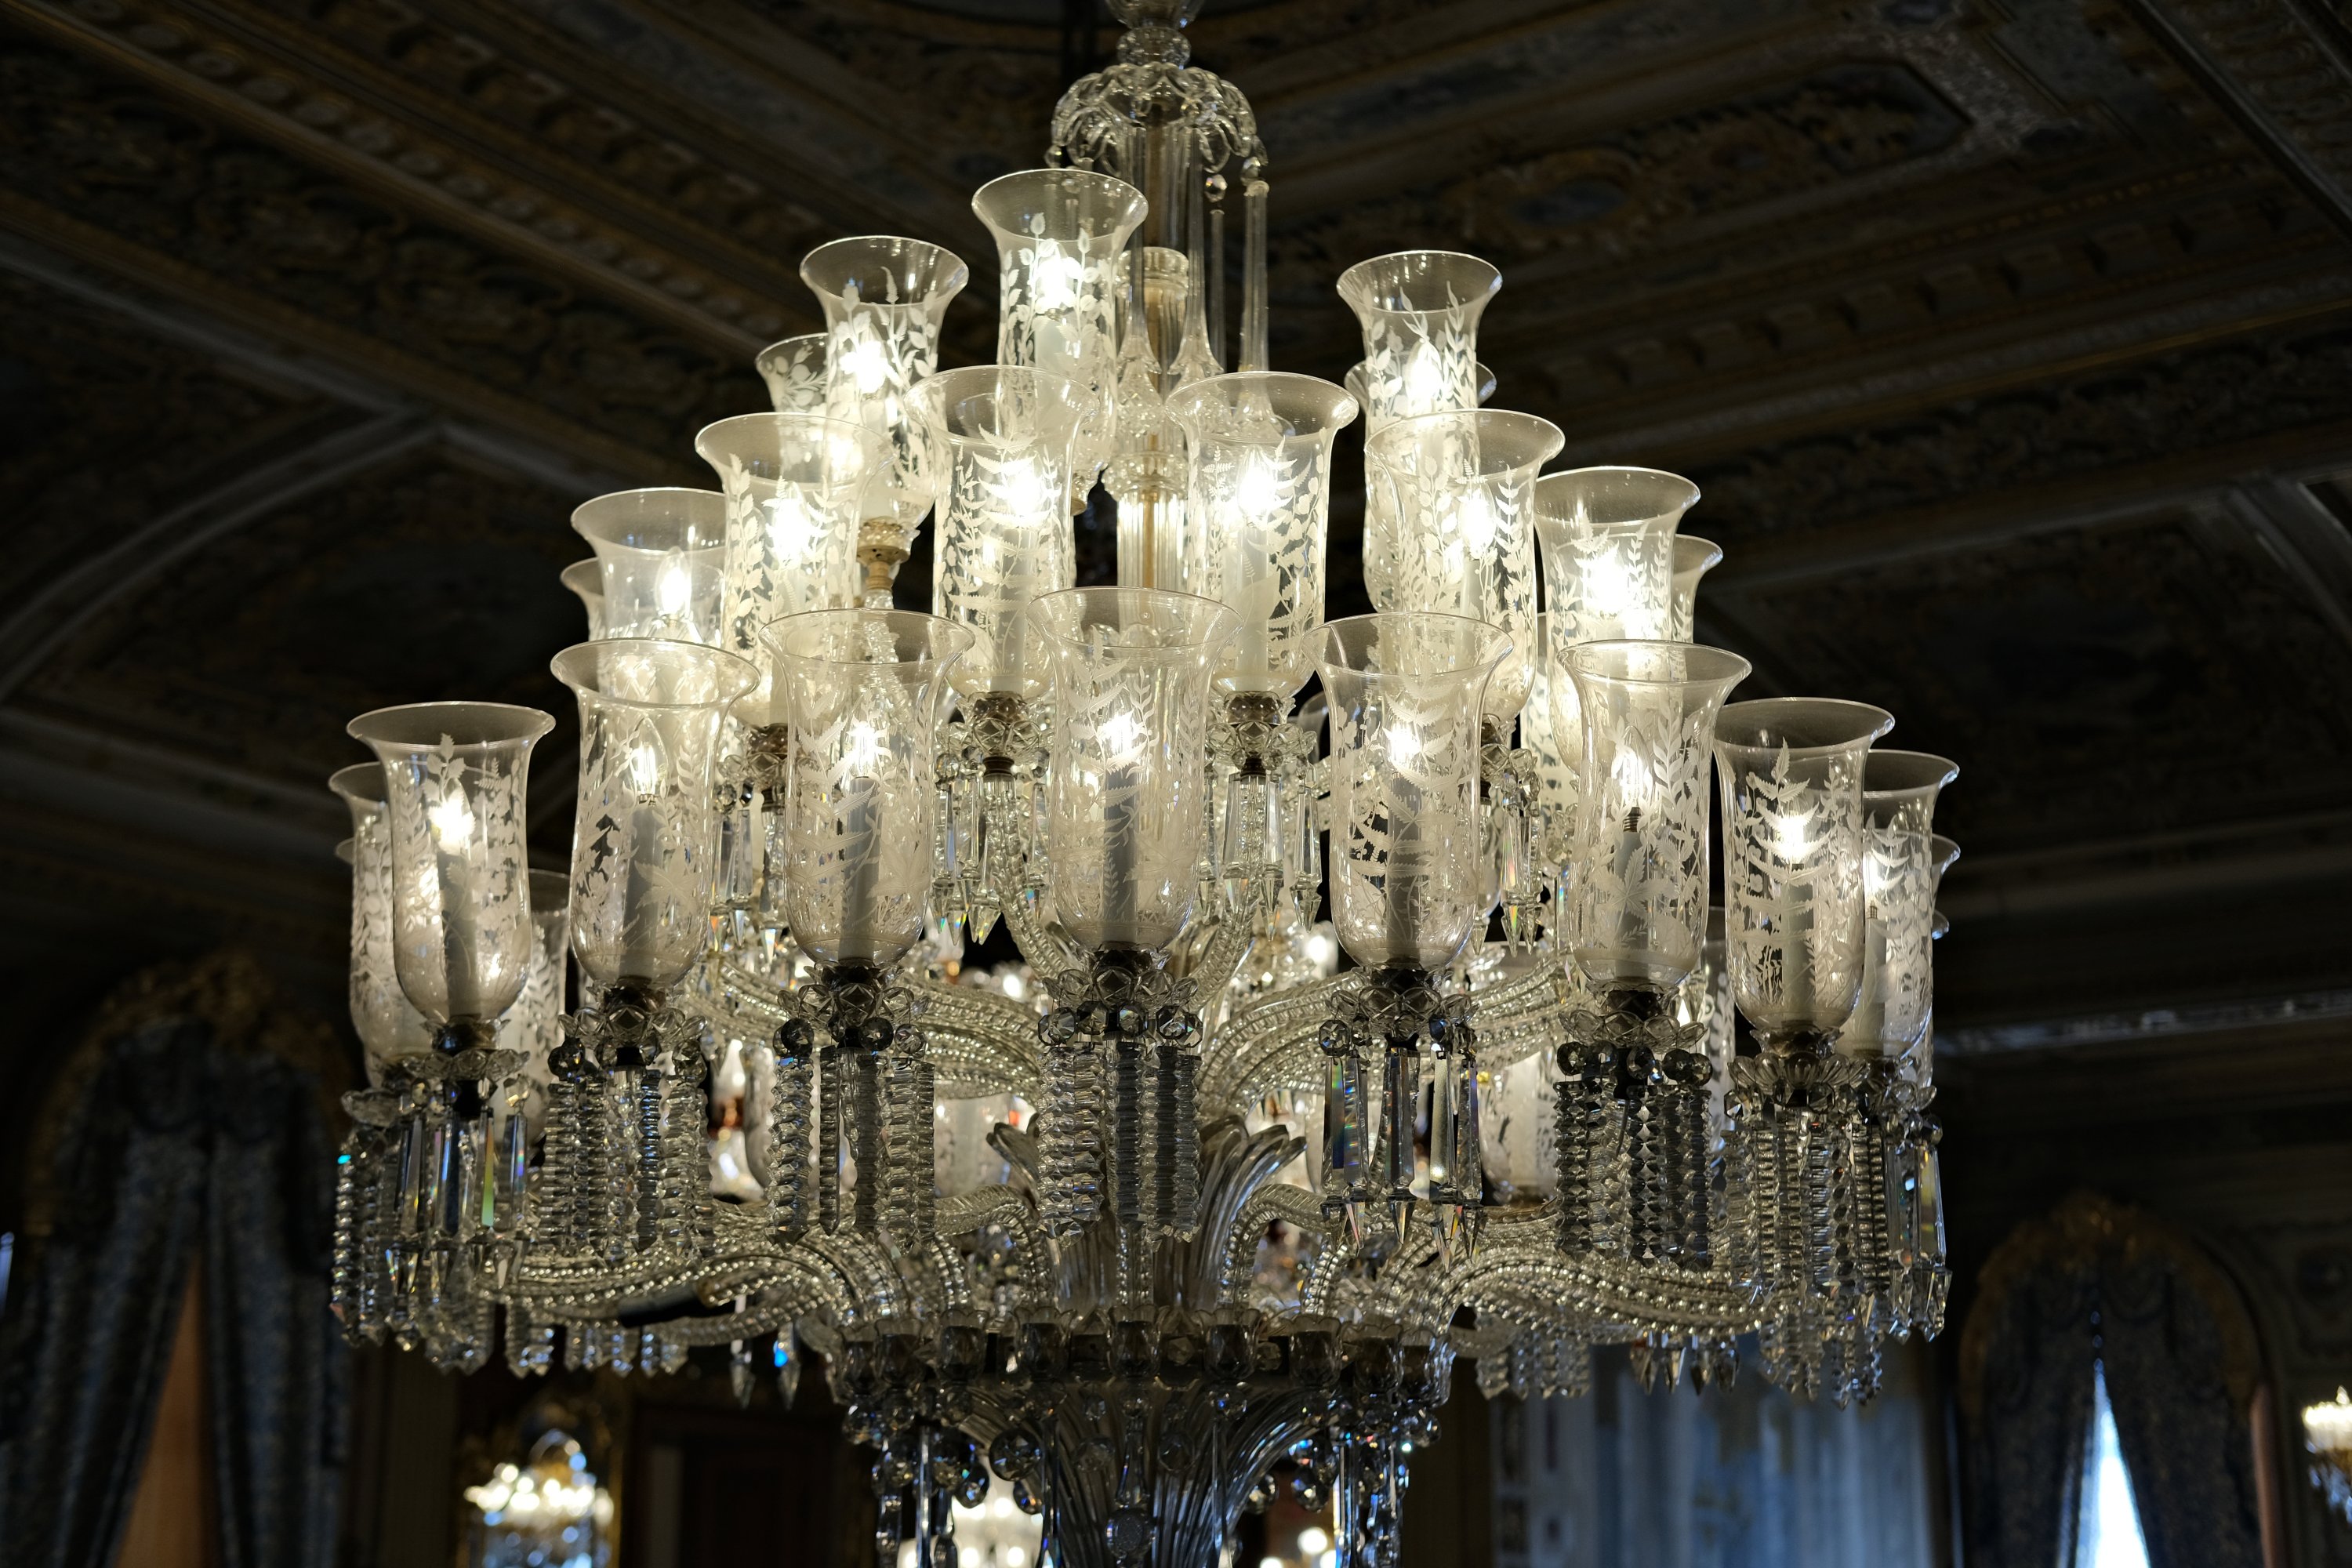 A chandelier at Dolmabahçe Palace, Istanbul, Turkey, September 2, 2022. (AA Photo)